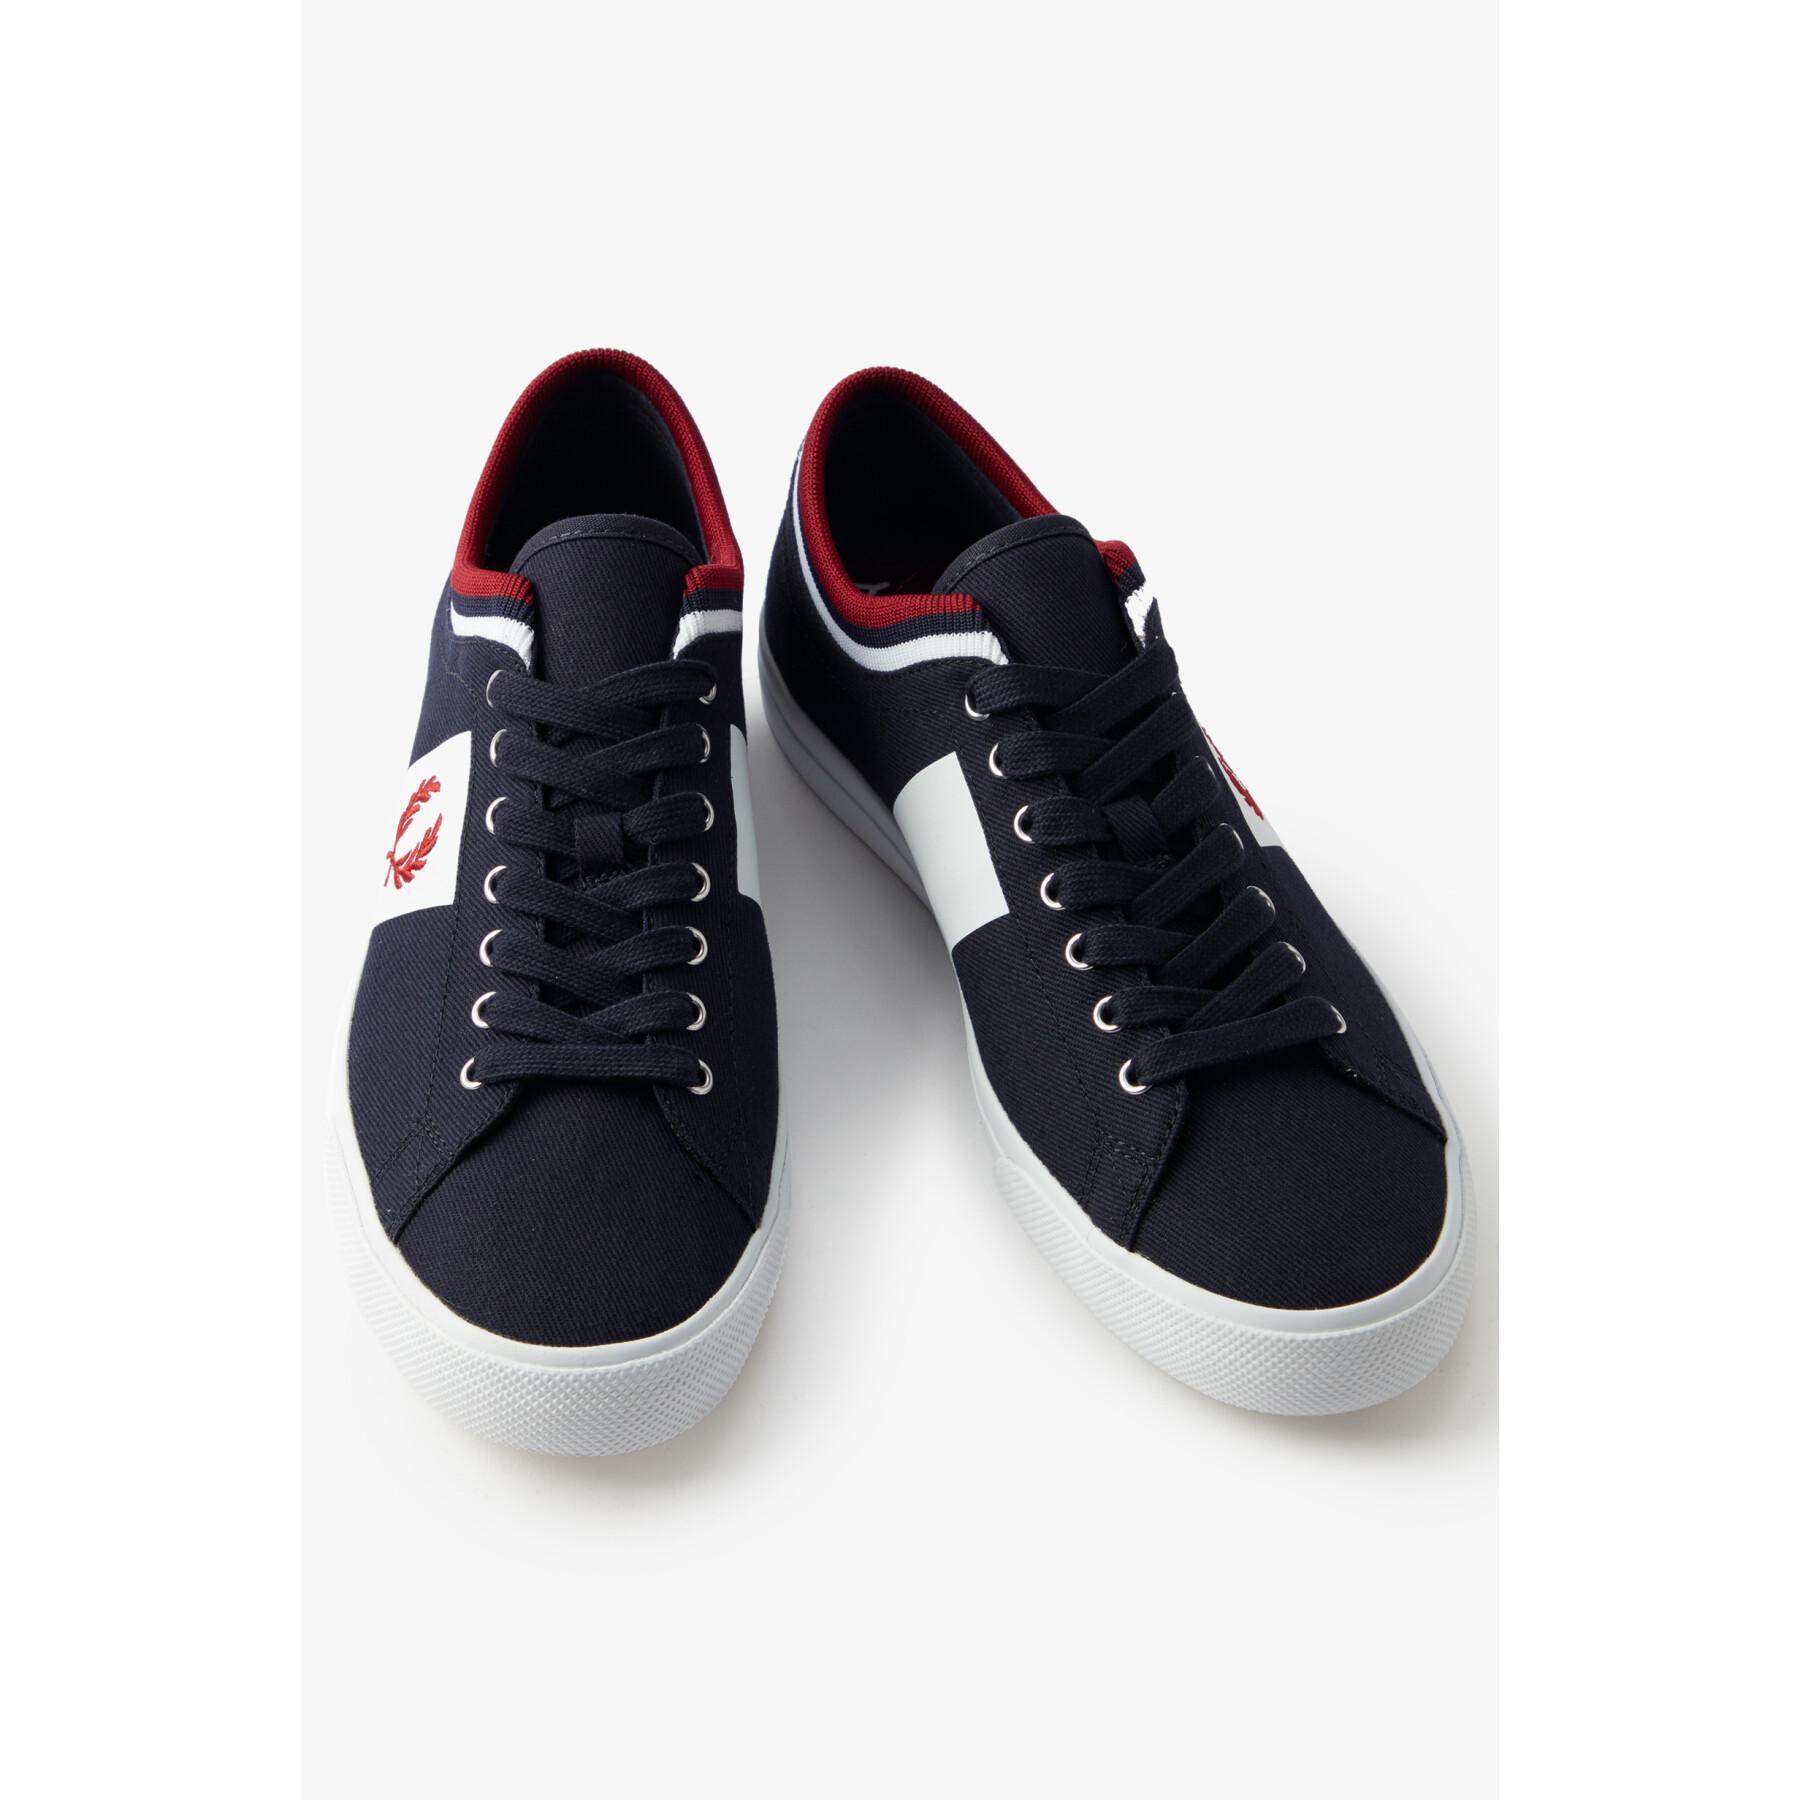 Zapatillas de sarga Fred Perry Underspin tipped cuff